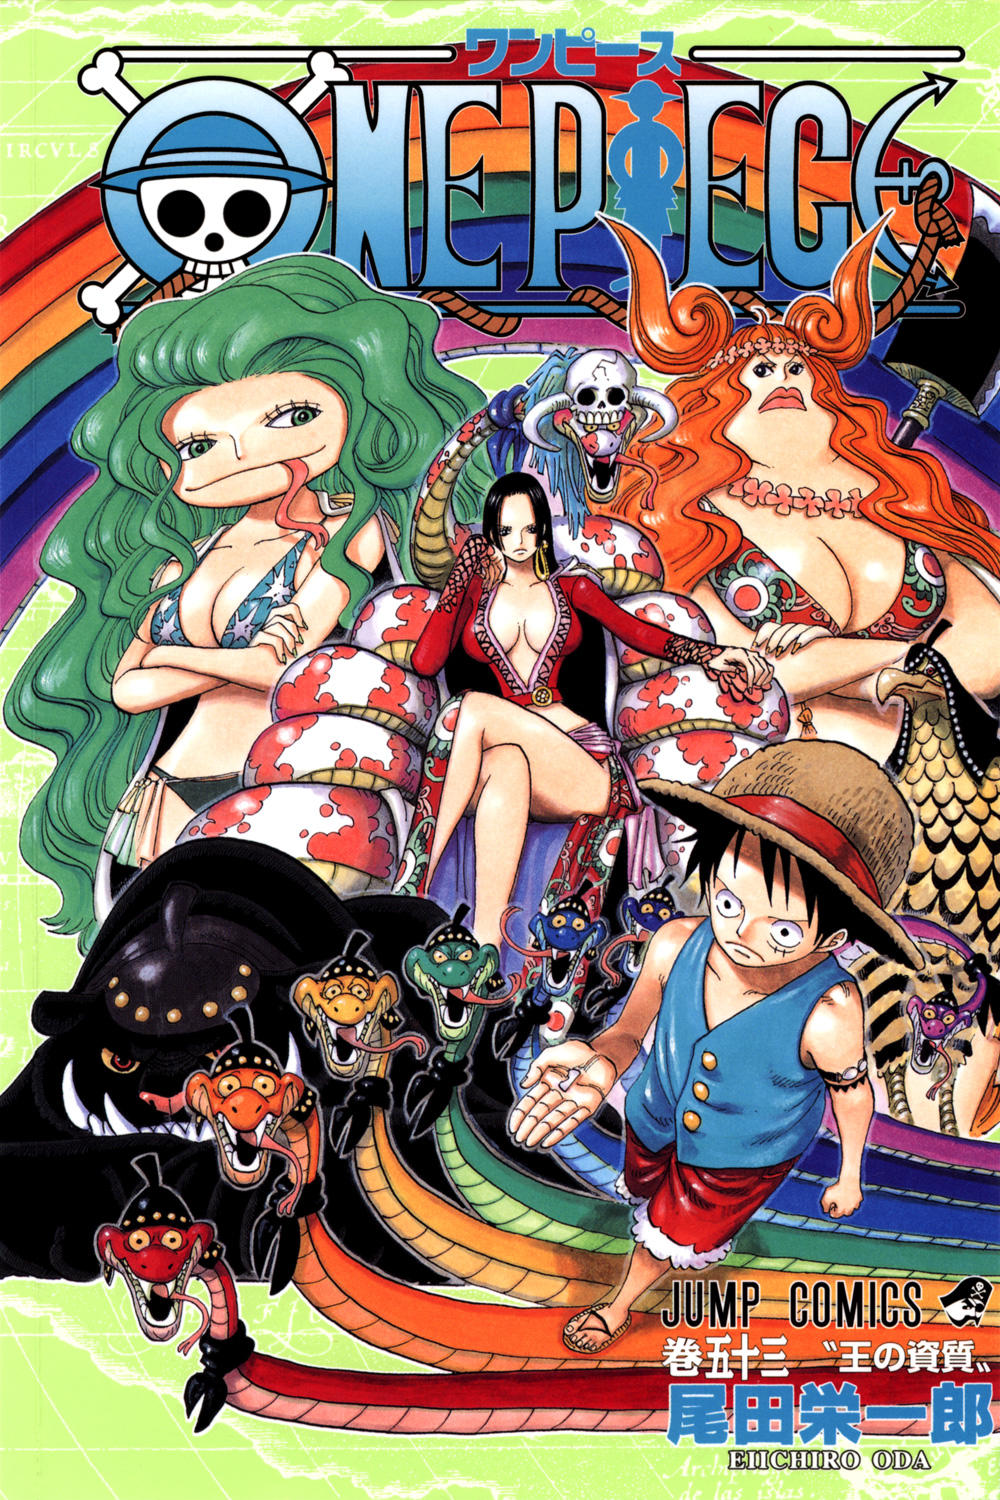 Read One Piece Digital Colored Comics Vol 53 Chapter 513 I Couldn T Save Them Manganelo